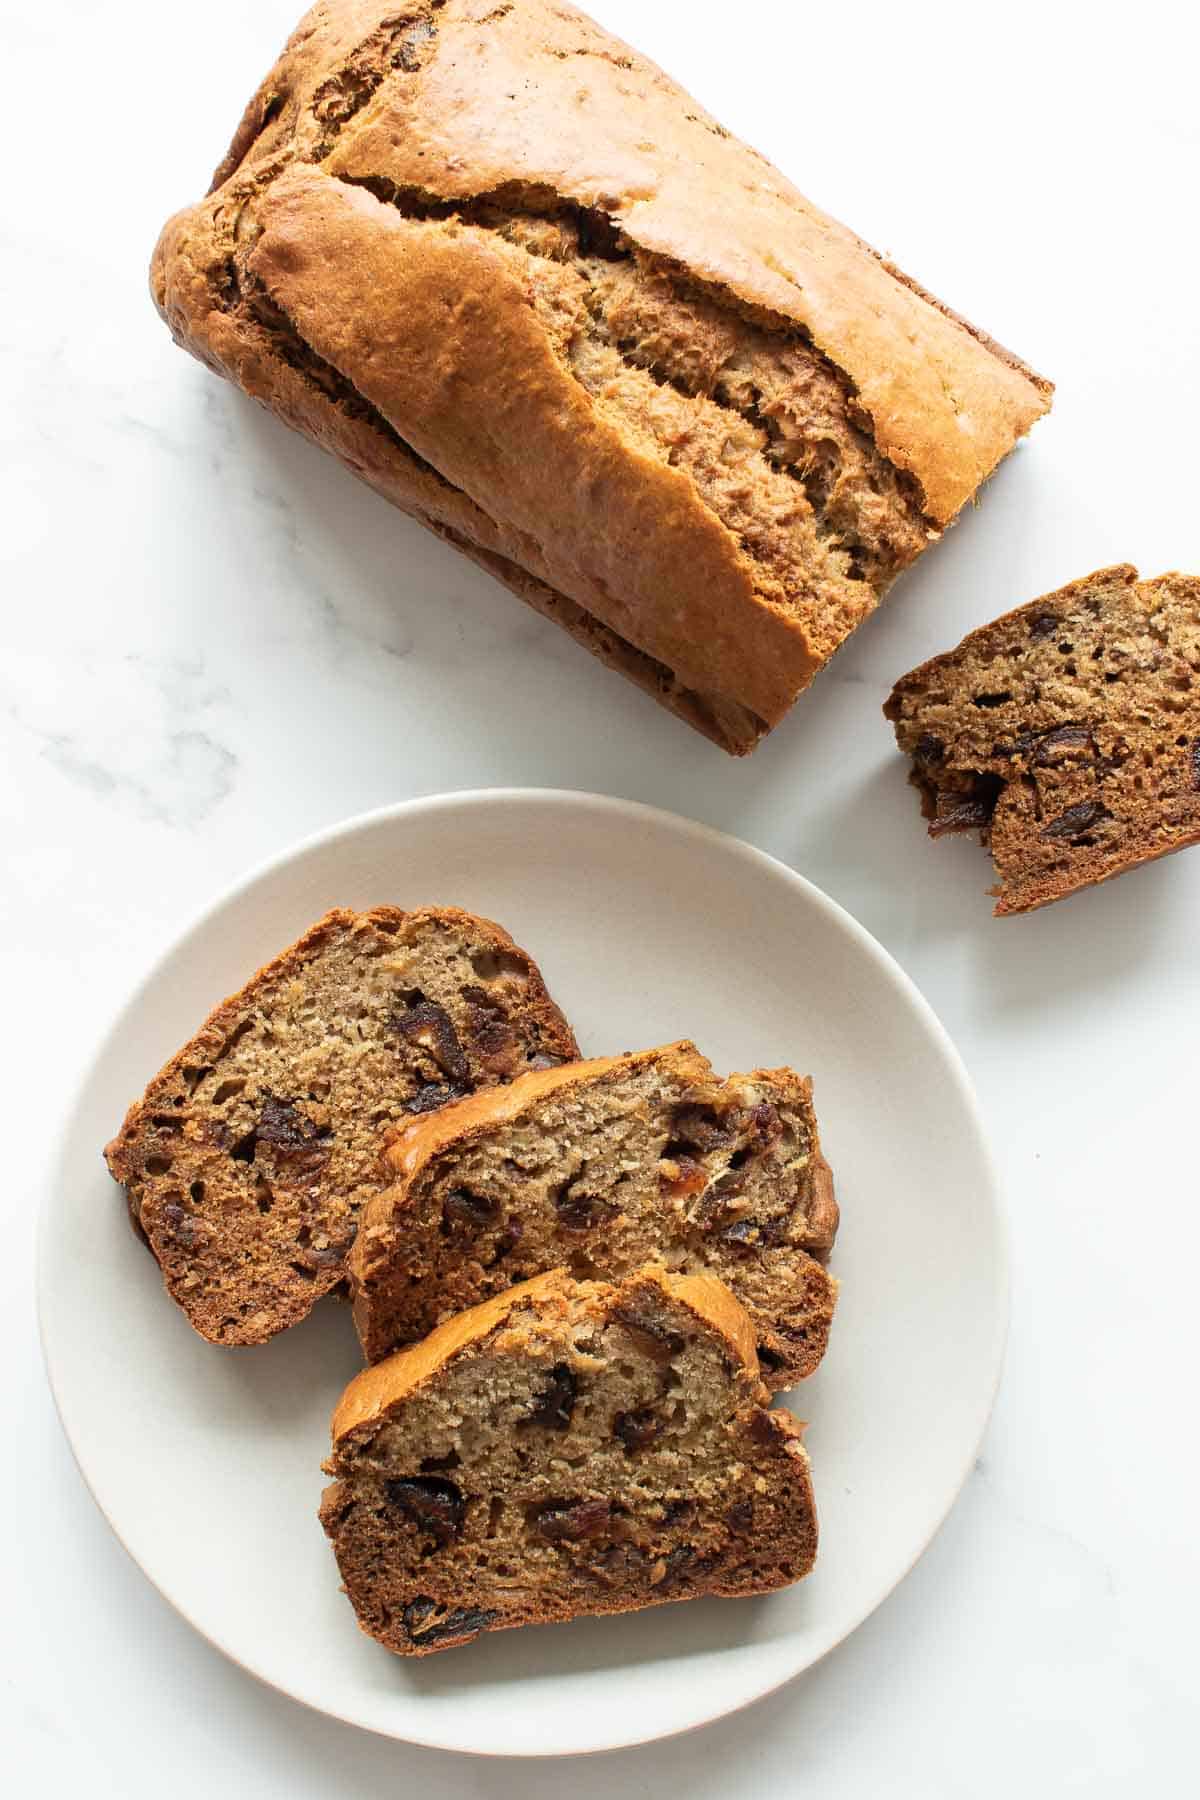 A plate of sliced banana bread, with half a loaf on the side.